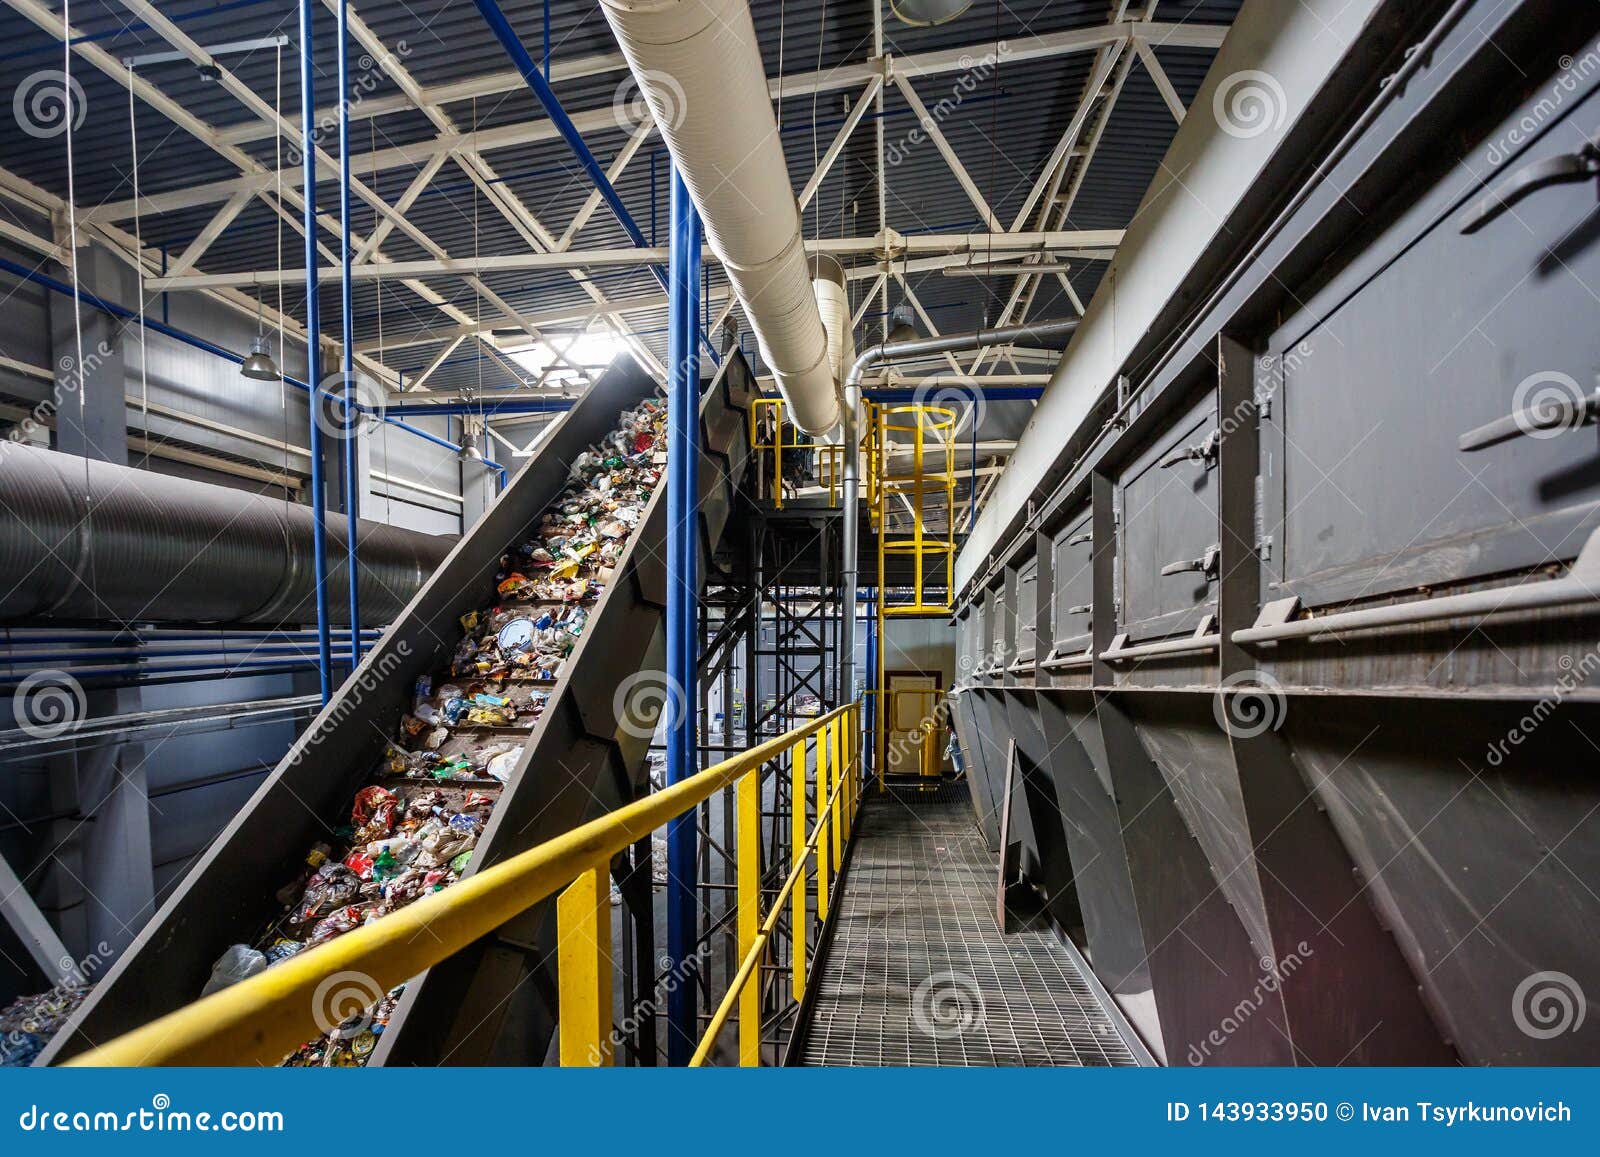 moving conveyor transporter on modern waste recycling processing plant. separate and sorting garbage collection. recycling and